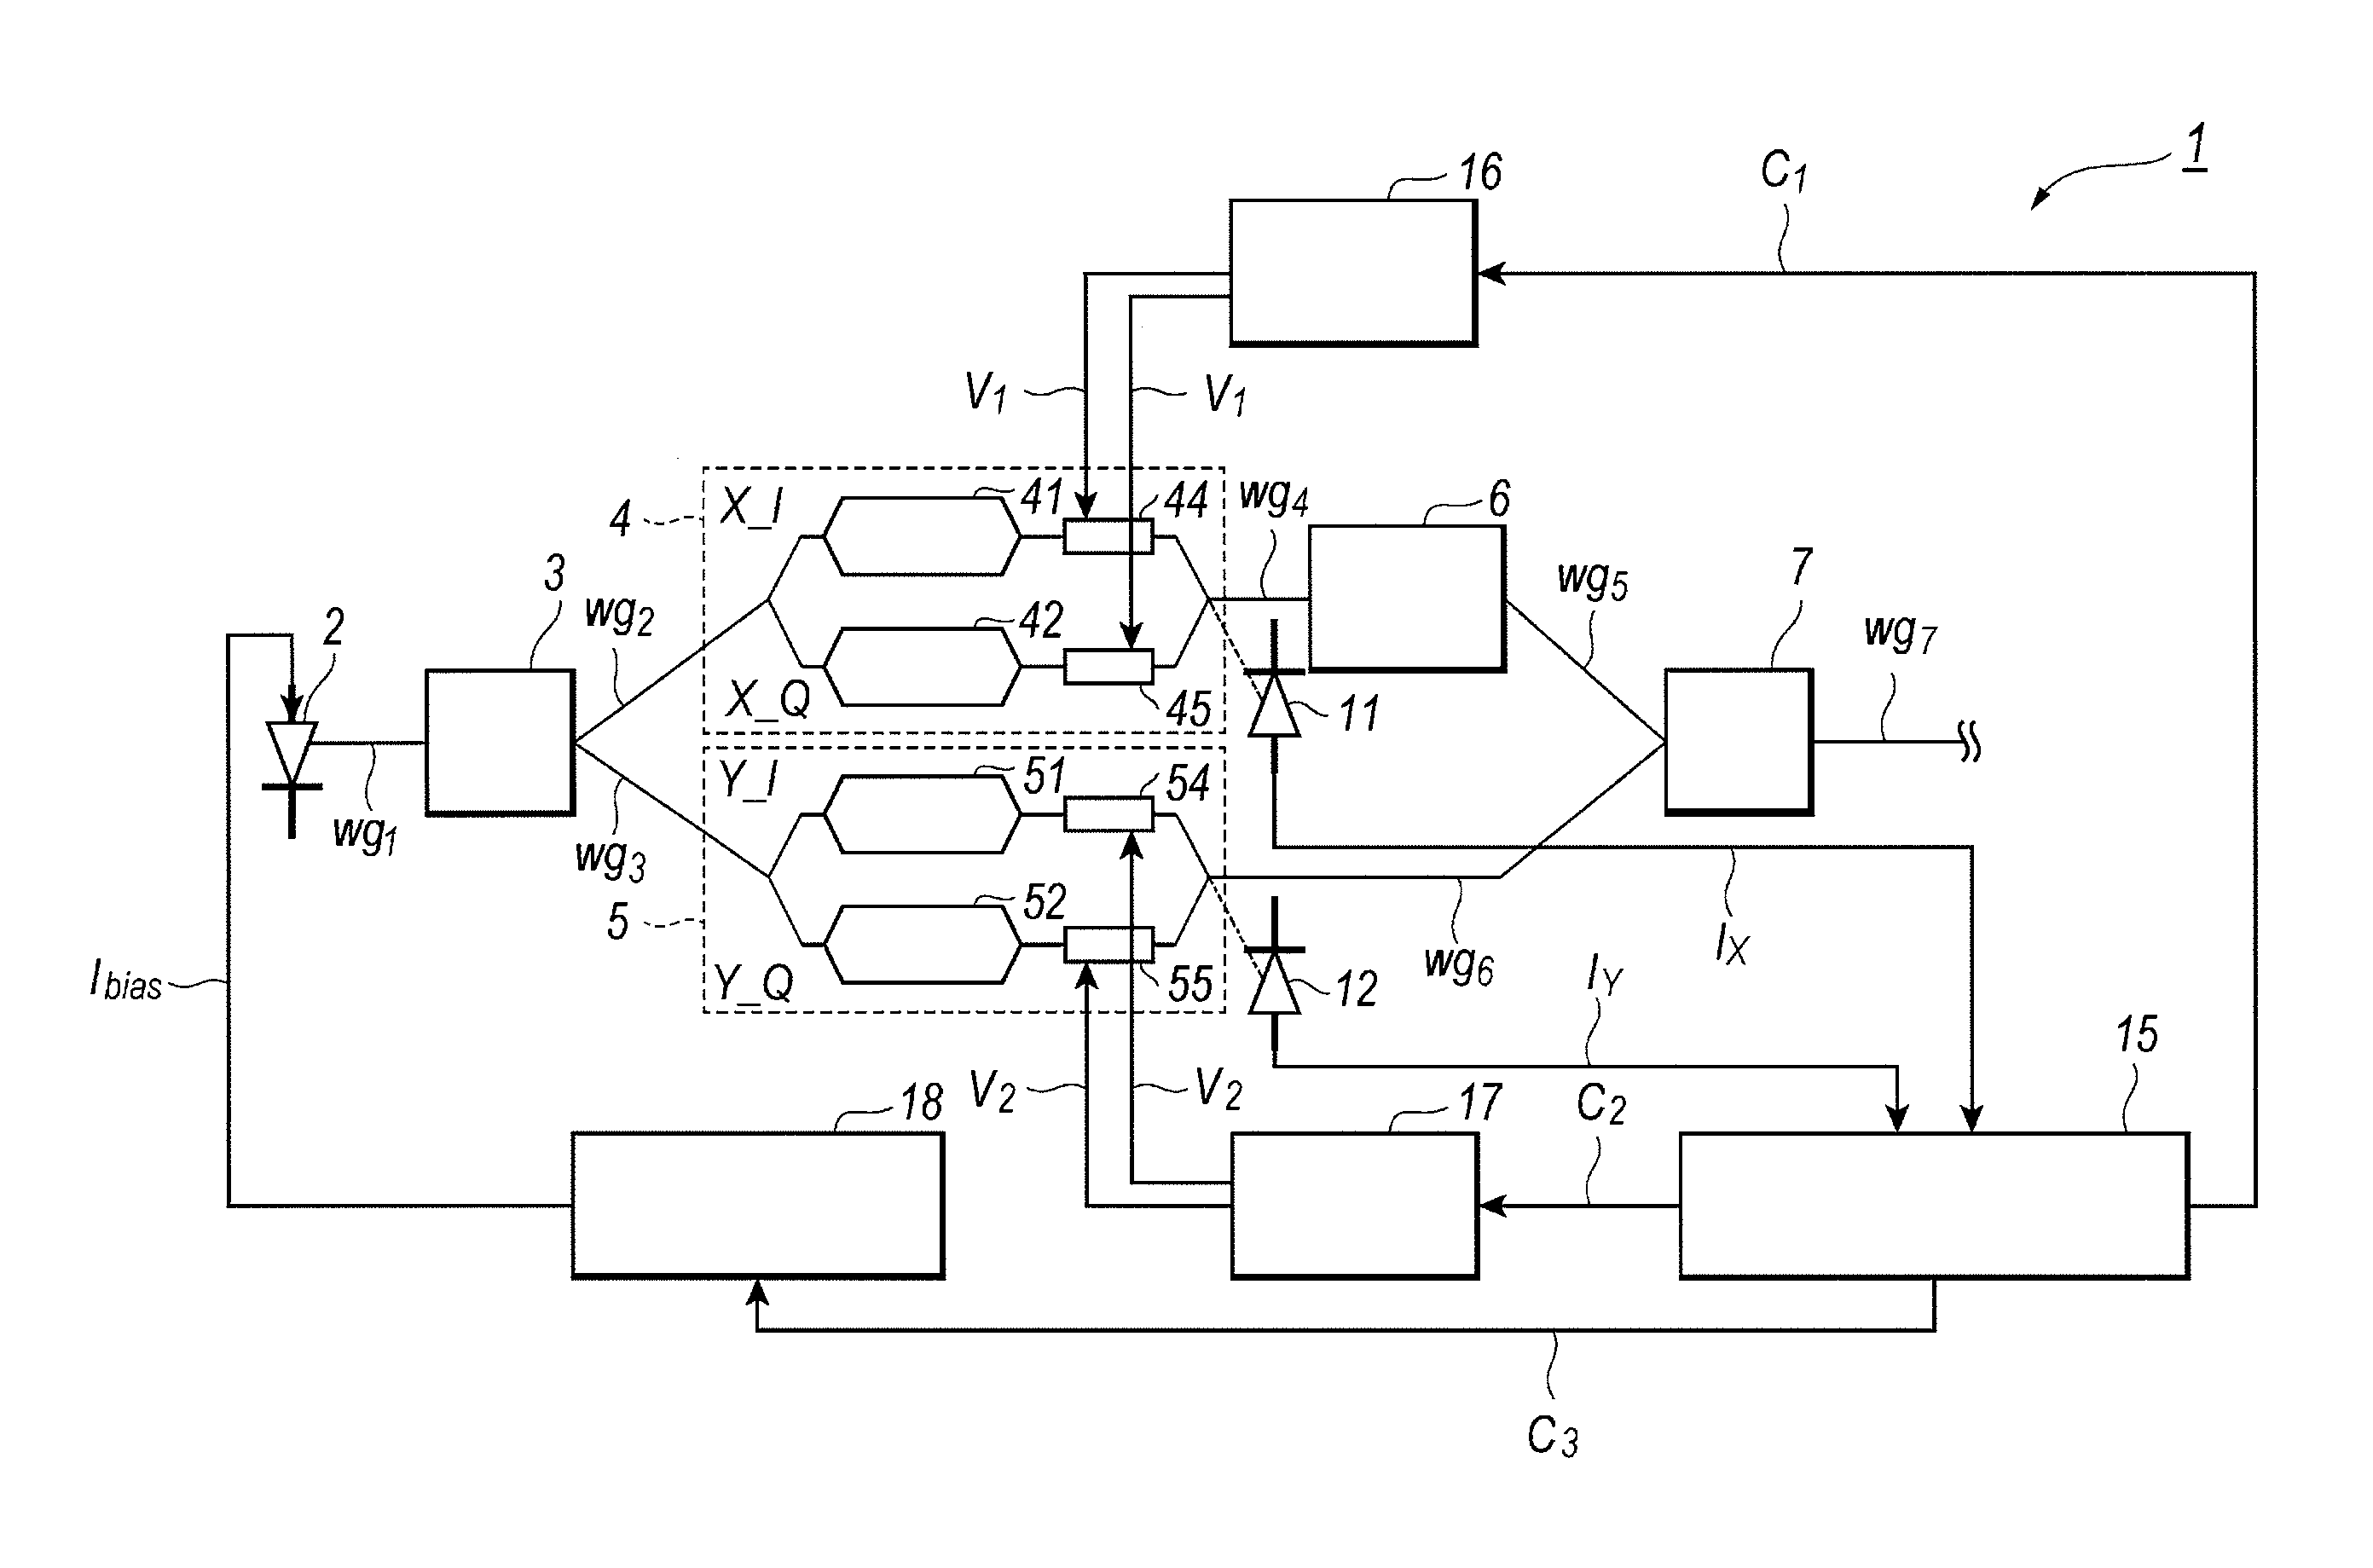 Optical transmitter implemented with two QPSK modulators made of semiconductor material and a method to control optical power output therefrom